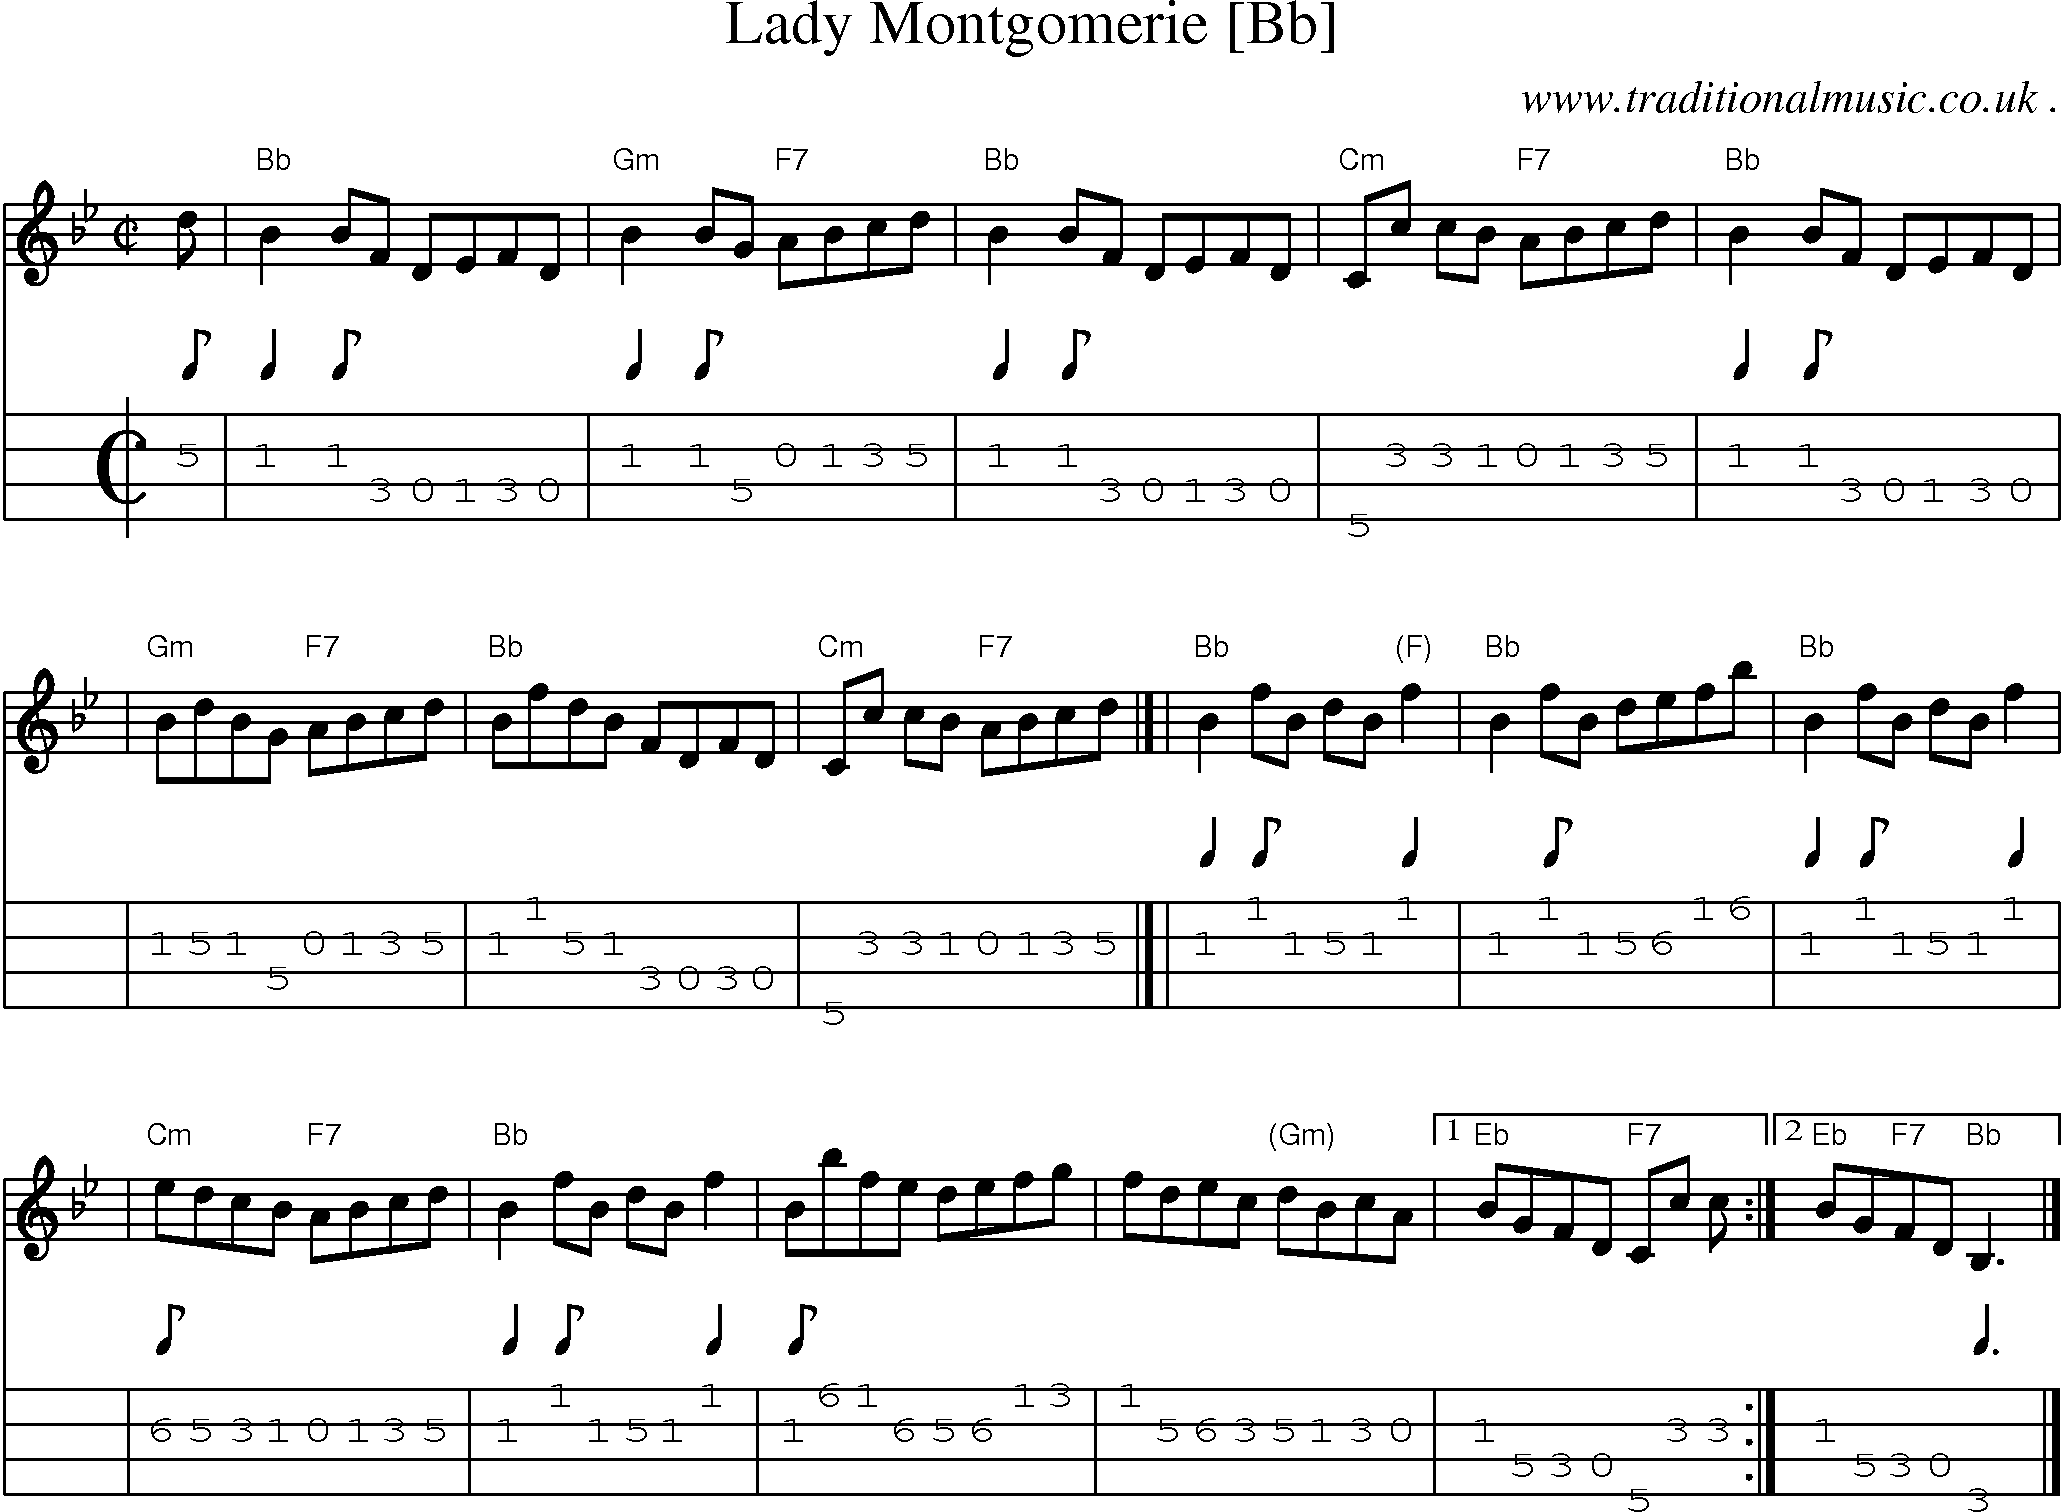 Sheet-music  score, Chords and Mandolin Tabs for Lady Montgomerie [bb]